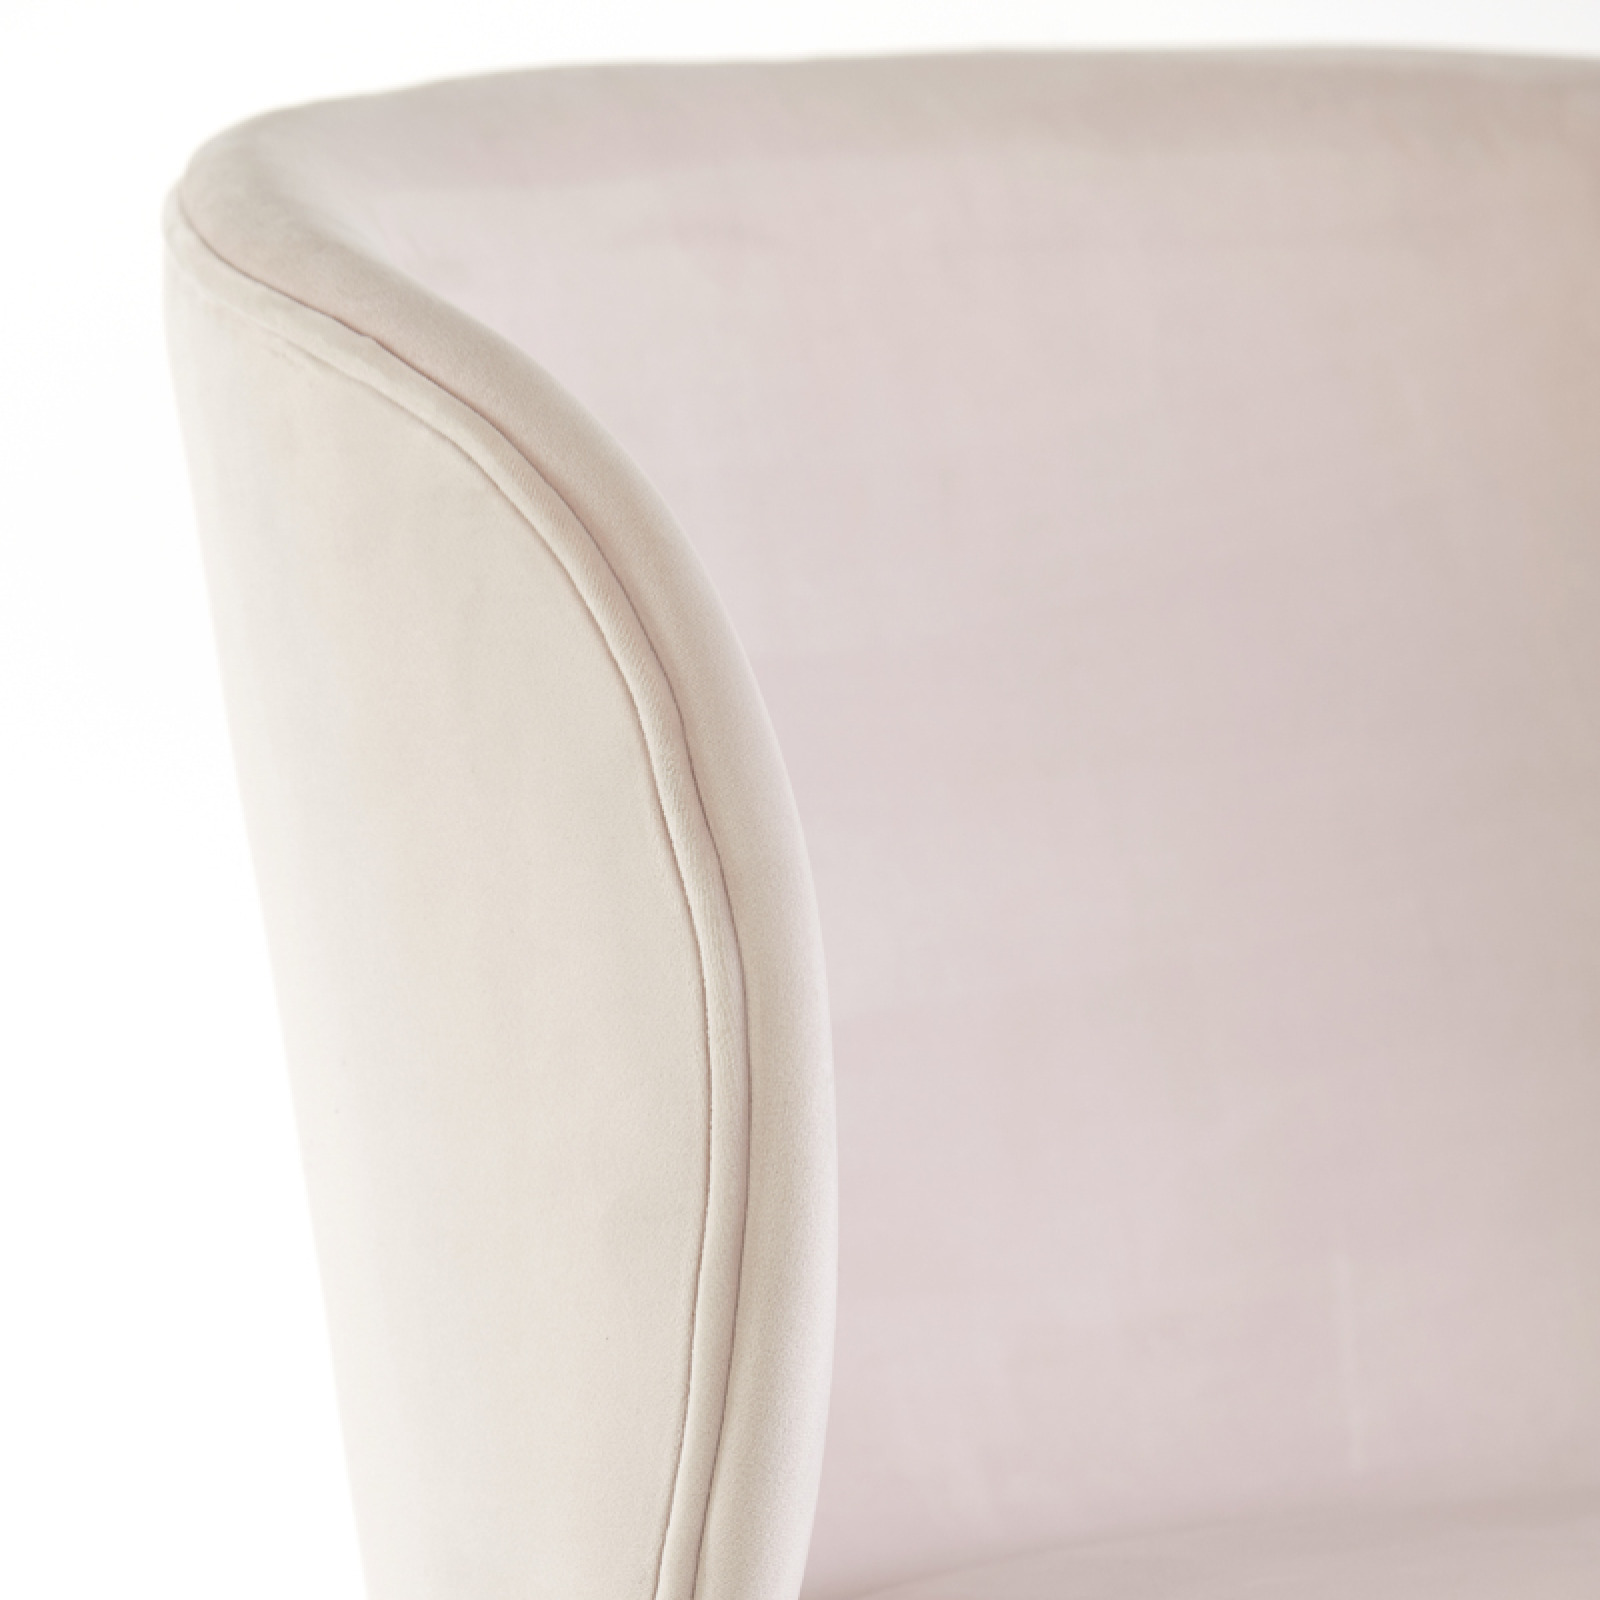 Elyna light pink chair